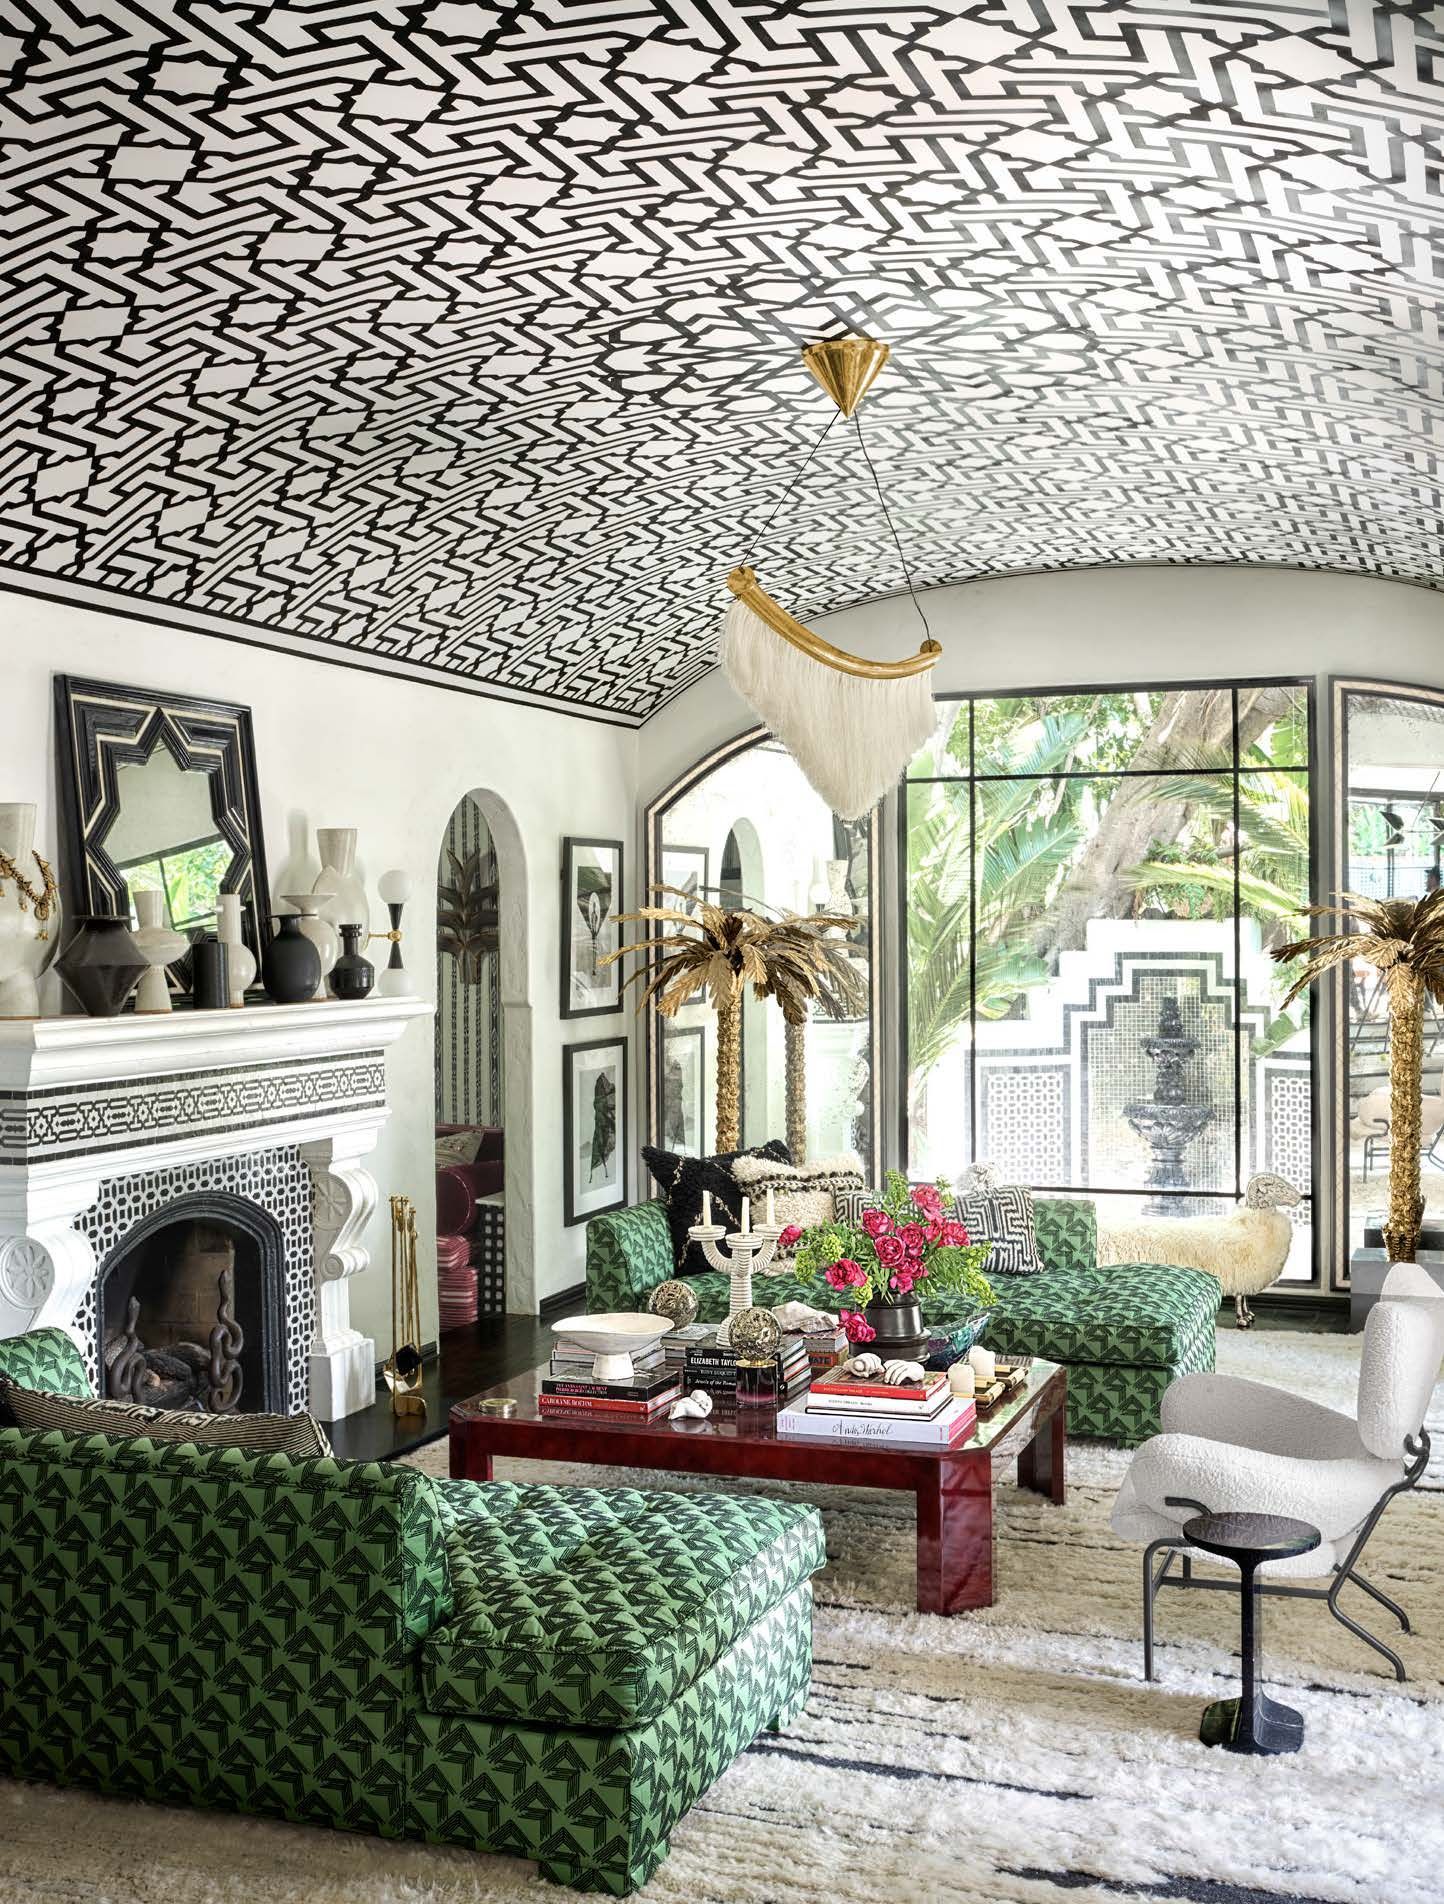 Patterned. +70 Unique Ceiling Design Ideas for Your Living Room - 9